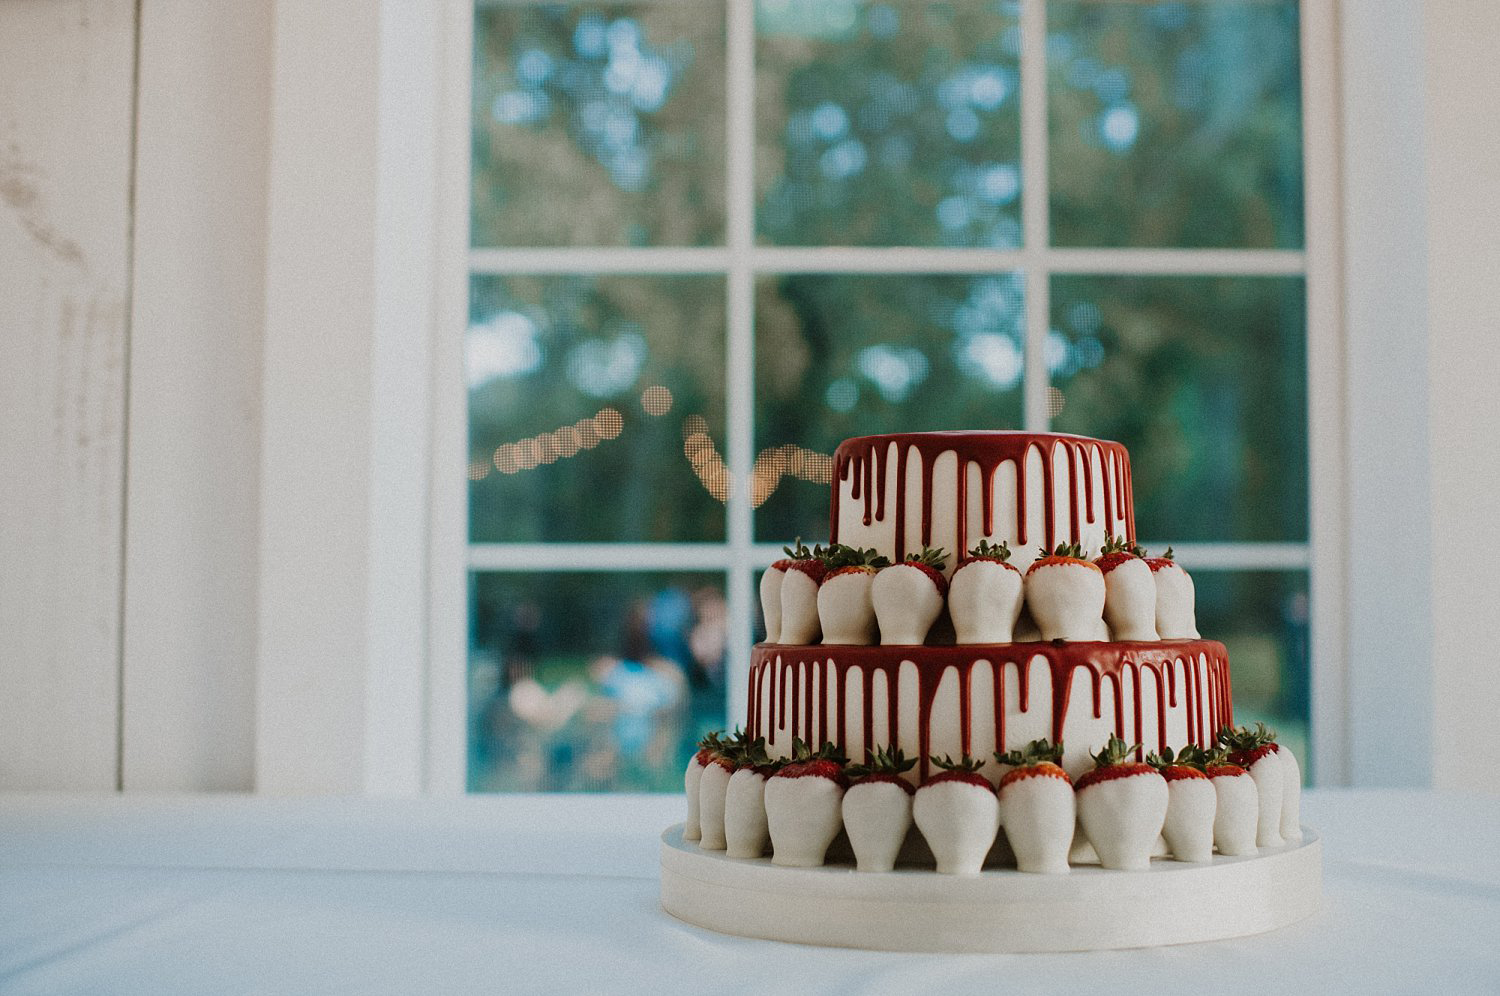 White and red groom drip cake with white chocolate strawberries